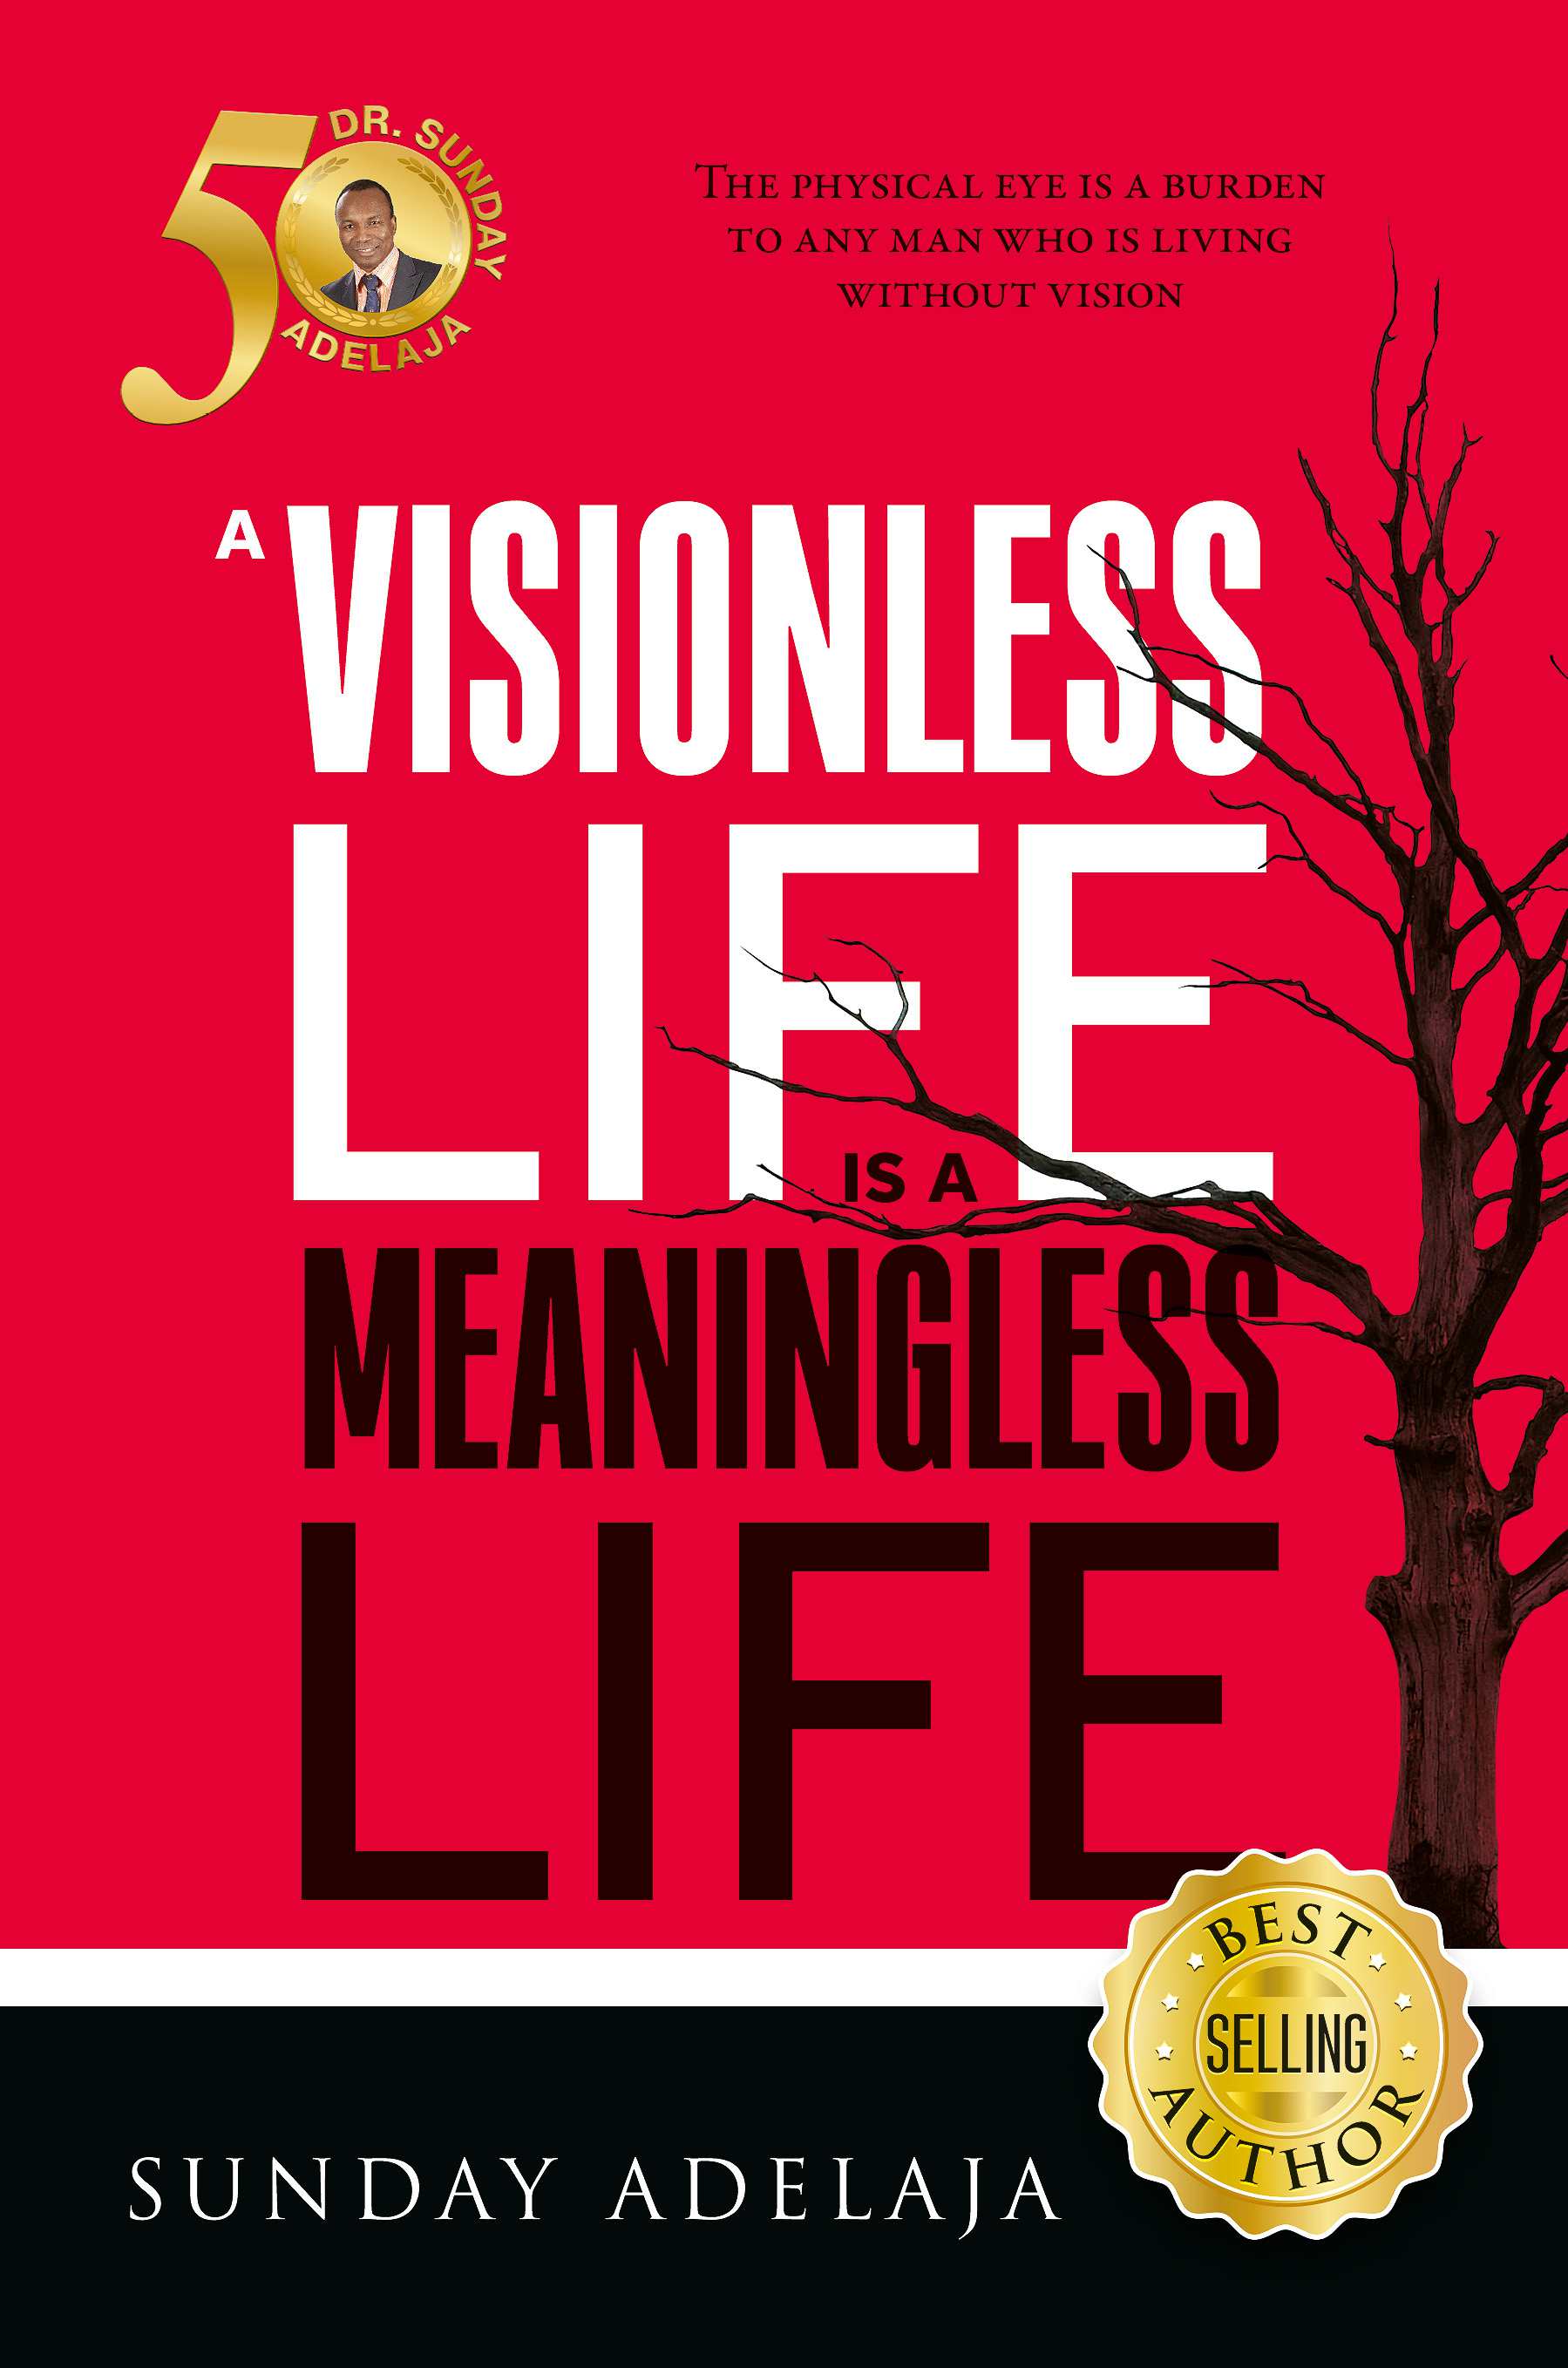 A-Visionless-Life-is-a-Meaningless-Life